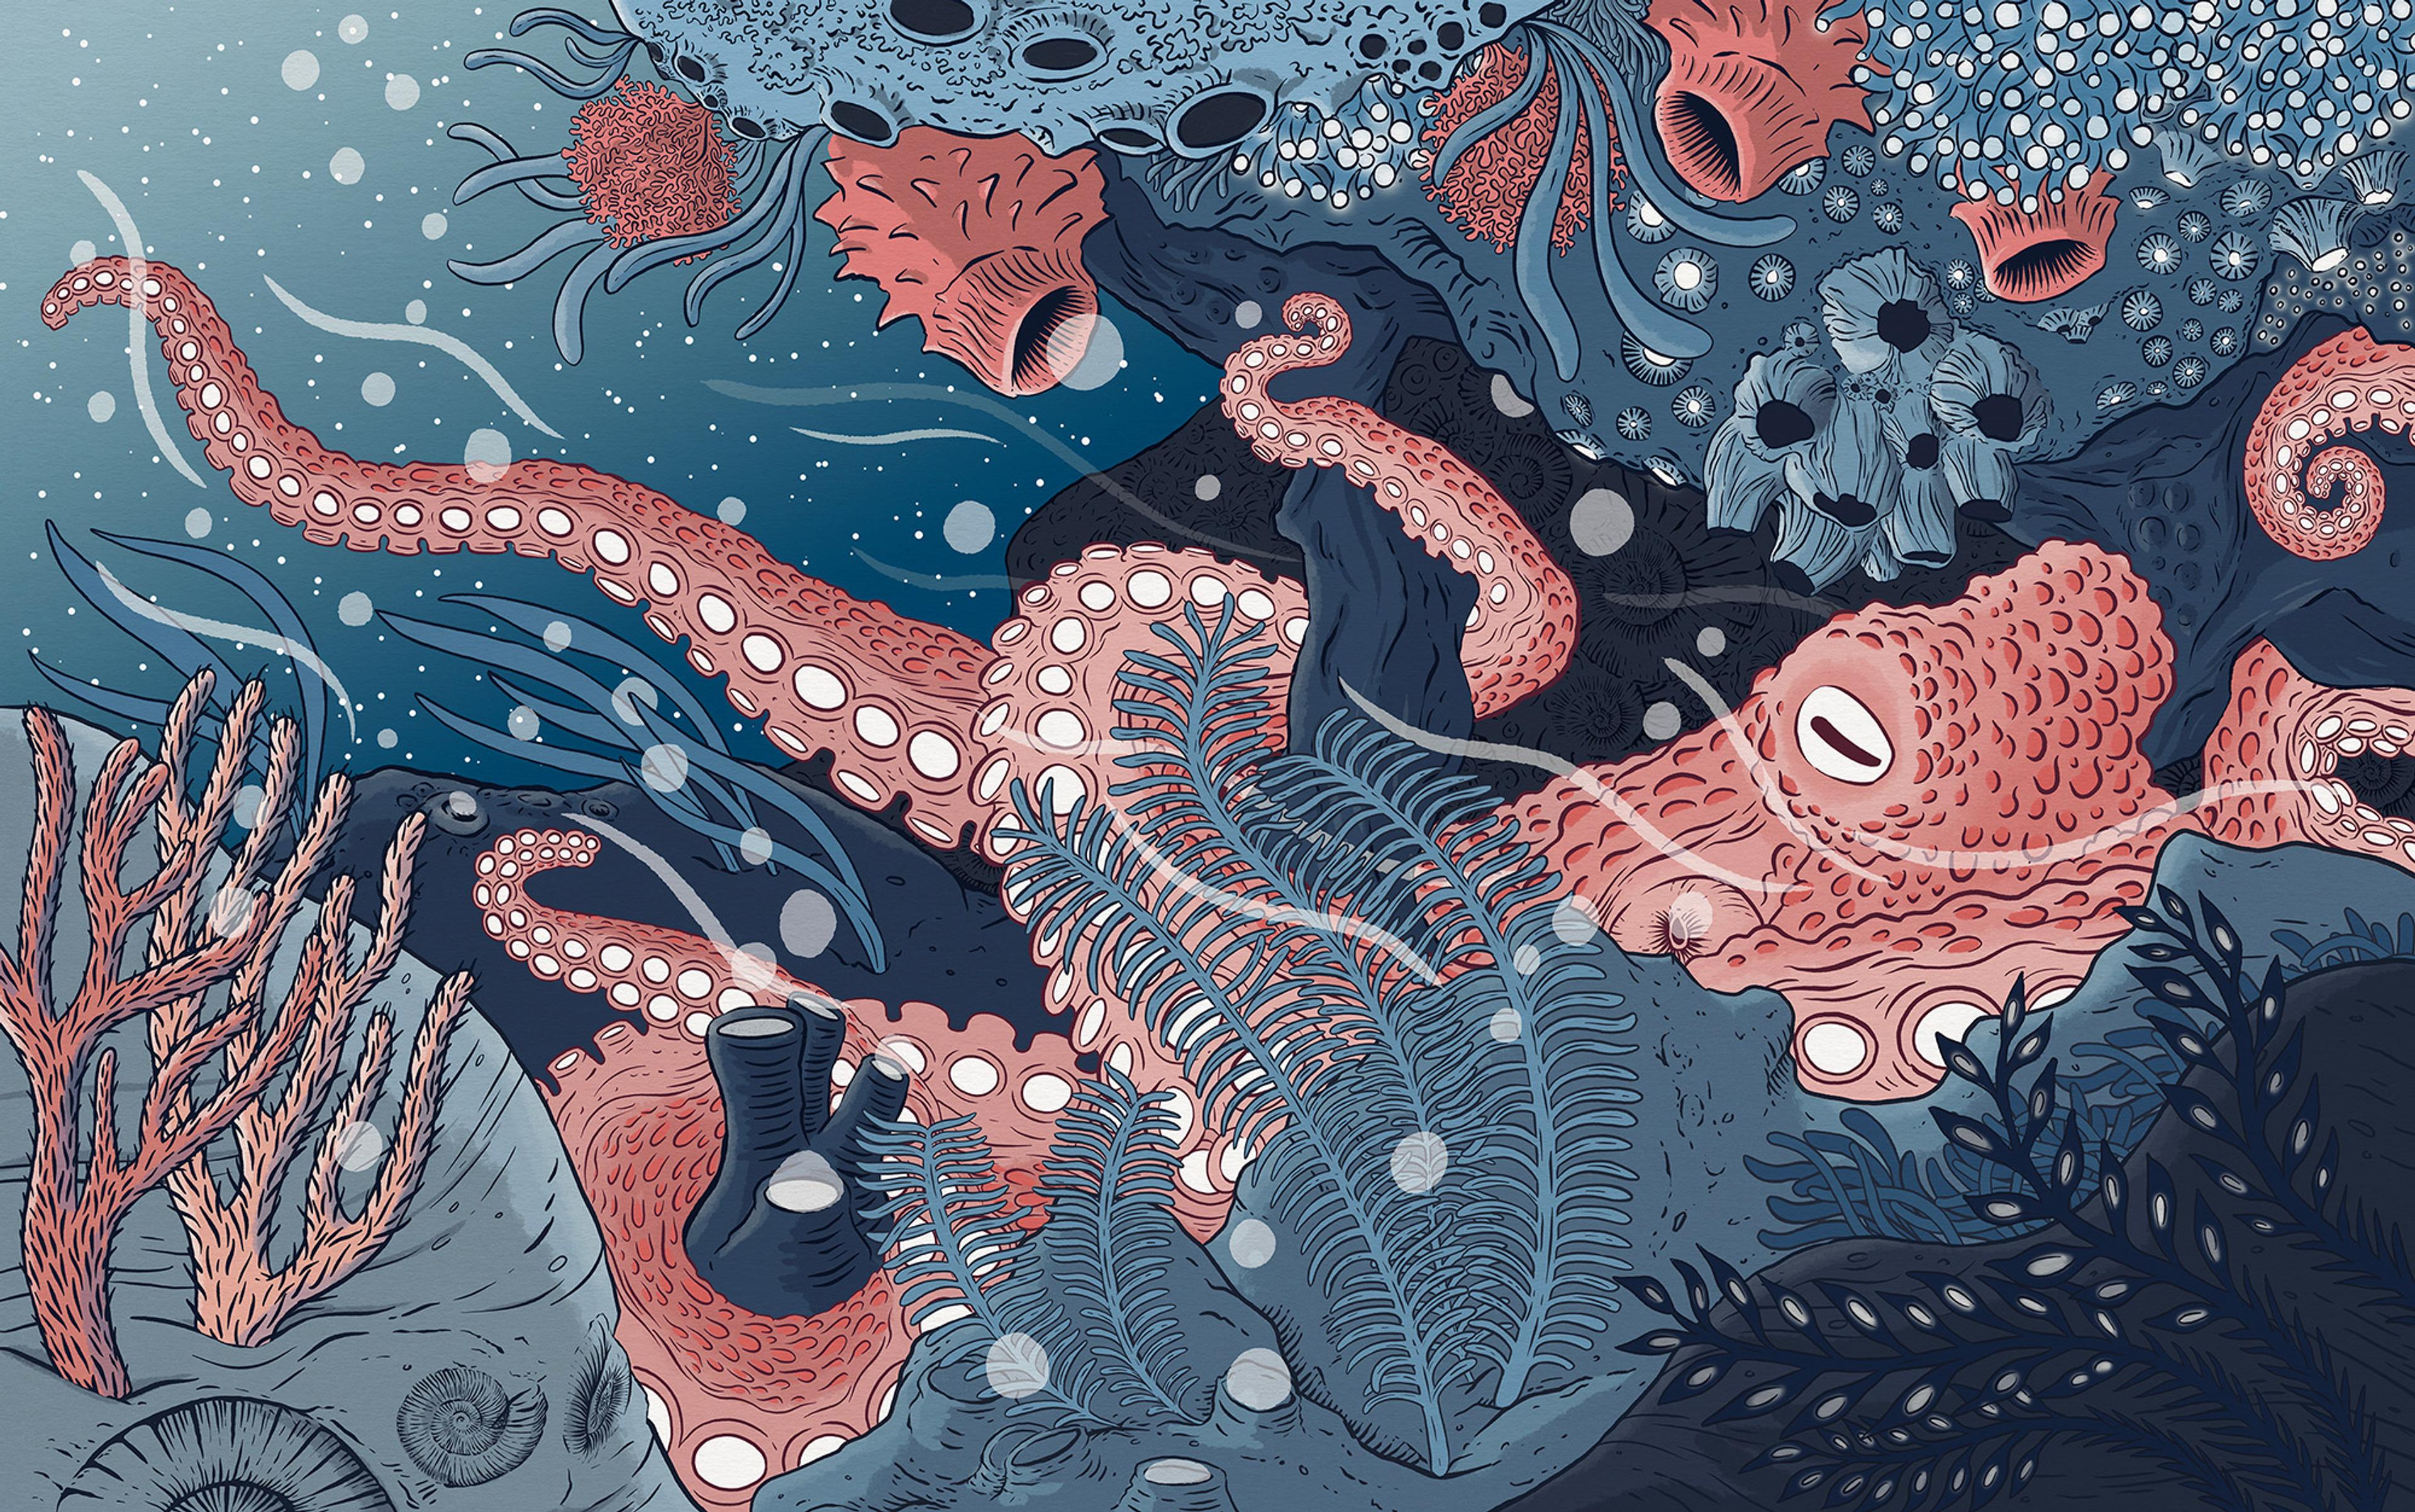 Illustration of an underwater scene with an octopus, coral, and various marine flora in blue and pink tones. Tentacles and sea plants are elaborately detailed.